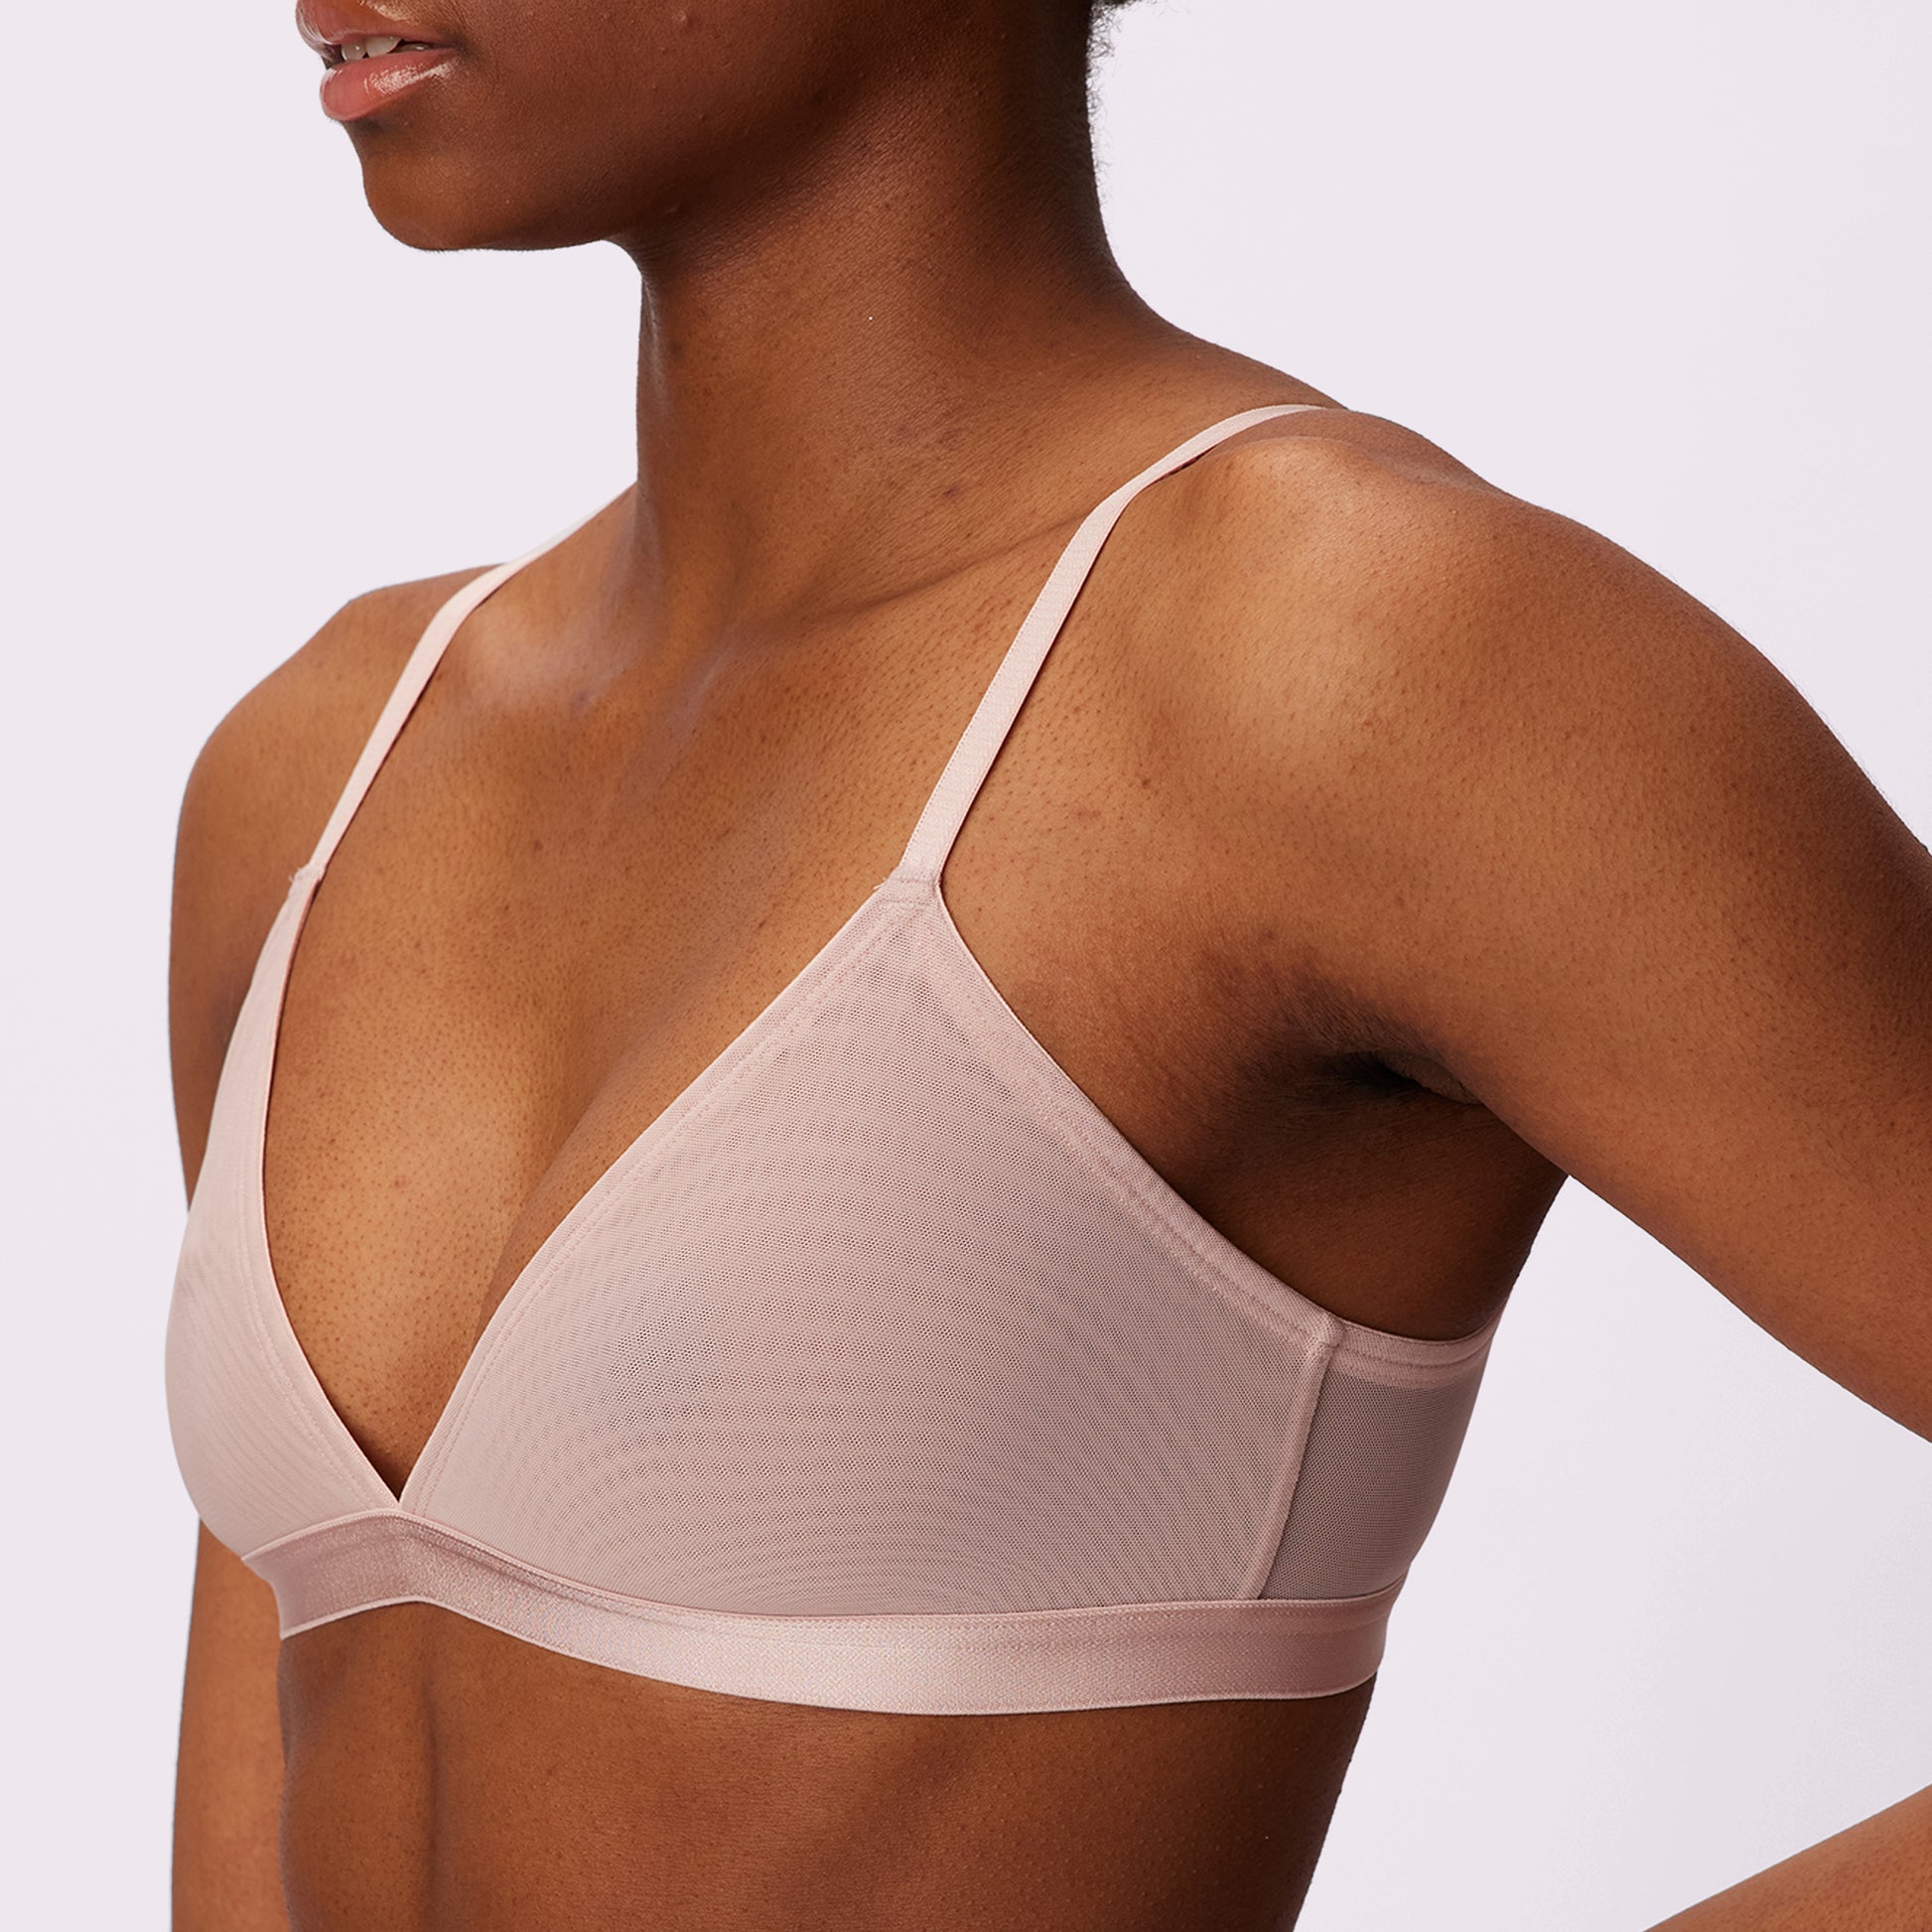 In need of a new bra or bralette? Look no further 💖Our Silky Mesh